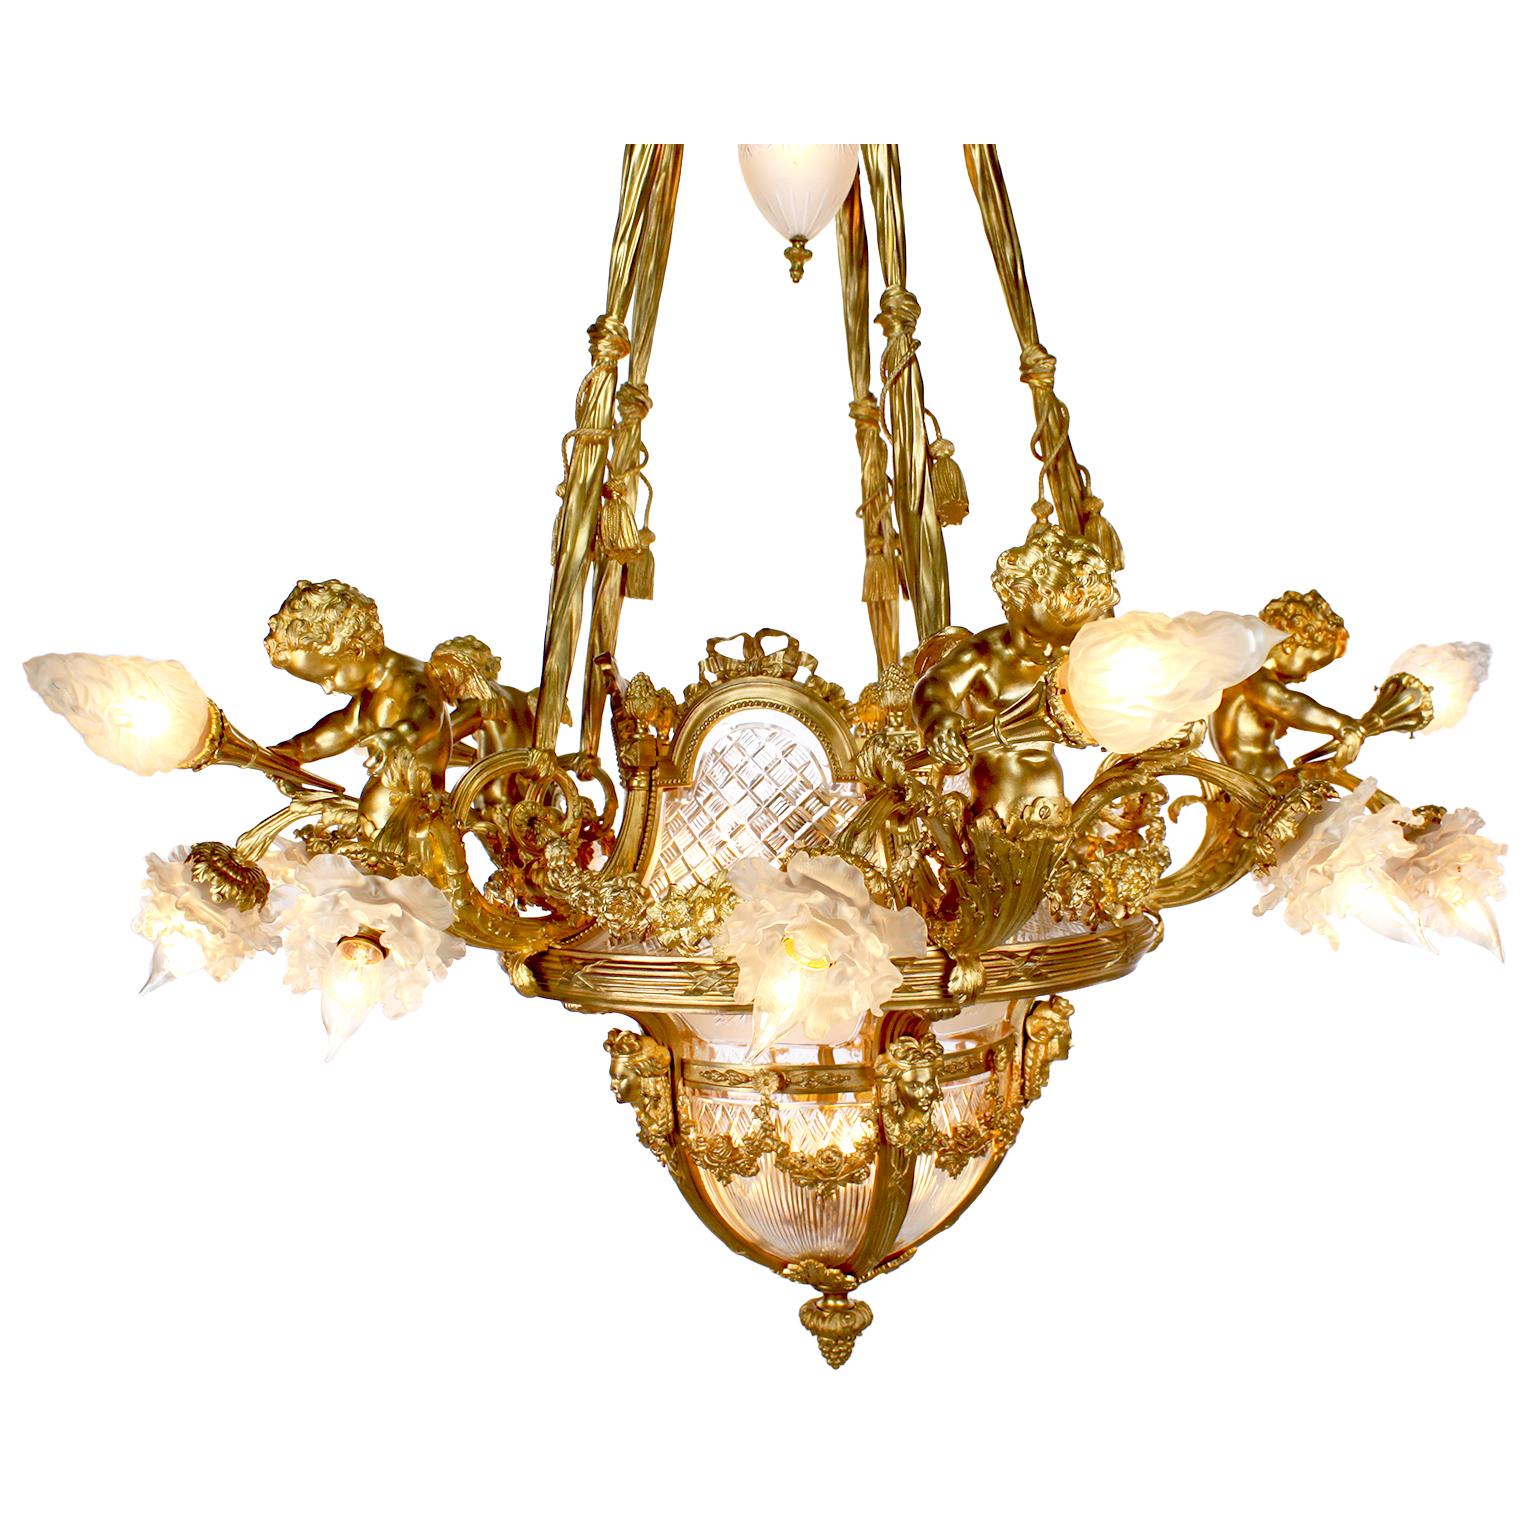 A very fine and palatial French 19th-20th century Louis XV style gilt bronze (Ormolu) and fitted-Baccarat crystal (cut-glass) twenty-six-light figural chandelier with five large cherubs, each holding a frosted glass torch and surmounted with two